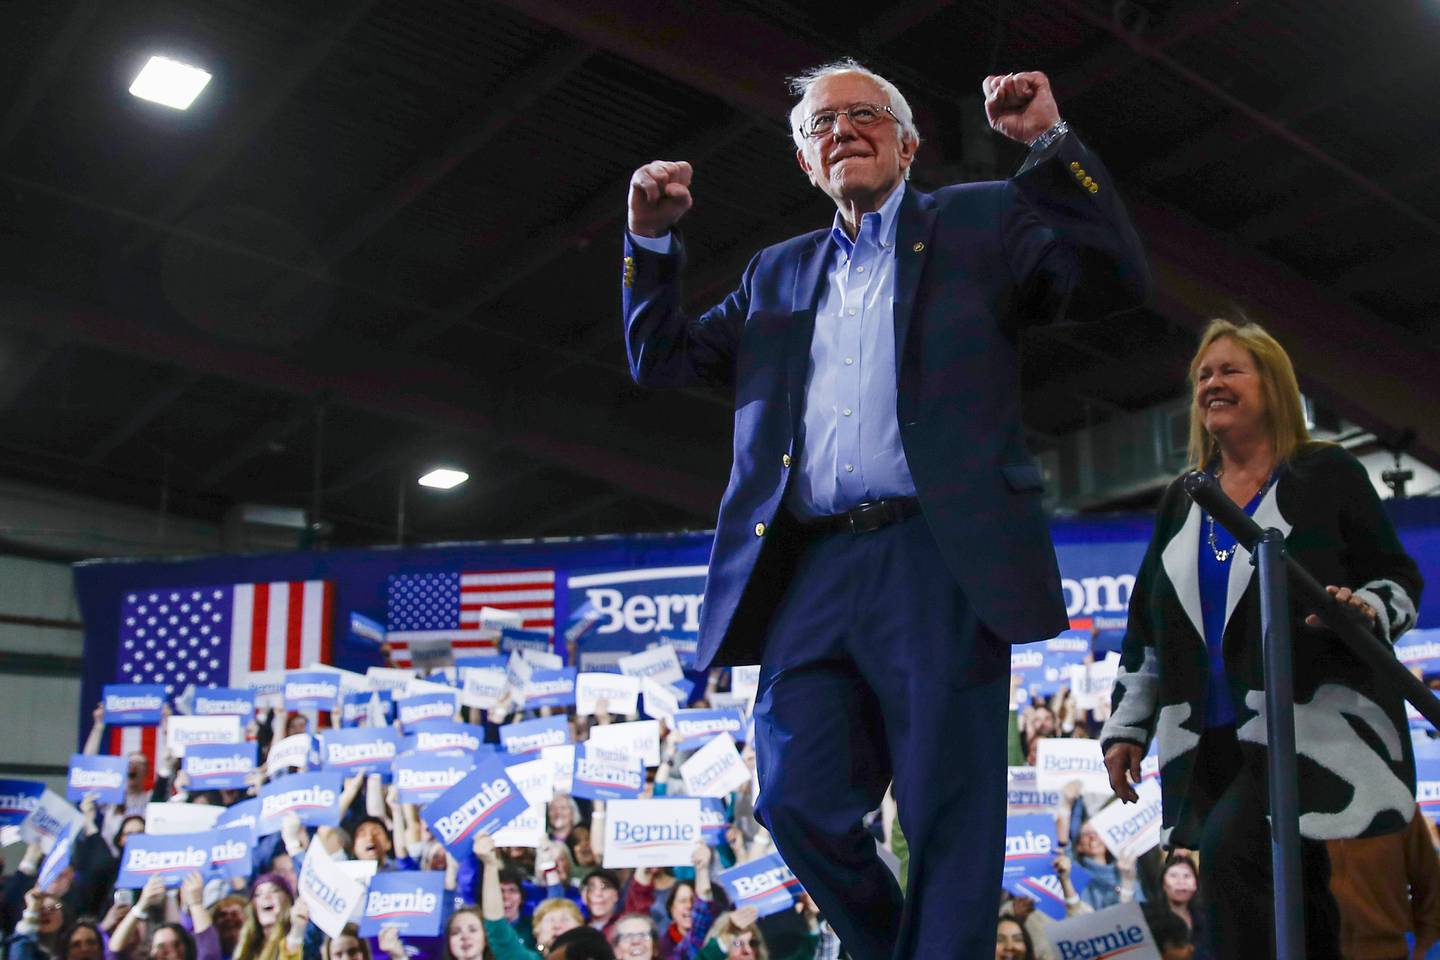 Democratic presidential candidate Sen. Bernie Sanders, I-Vt., accompanied by his wife Jane O'Meara Sanders, arrives to speak during a primary night election rally in Essex Junction, Vt., Tuesday, March 3, 2020. (AP Photo/Matt Rourke)